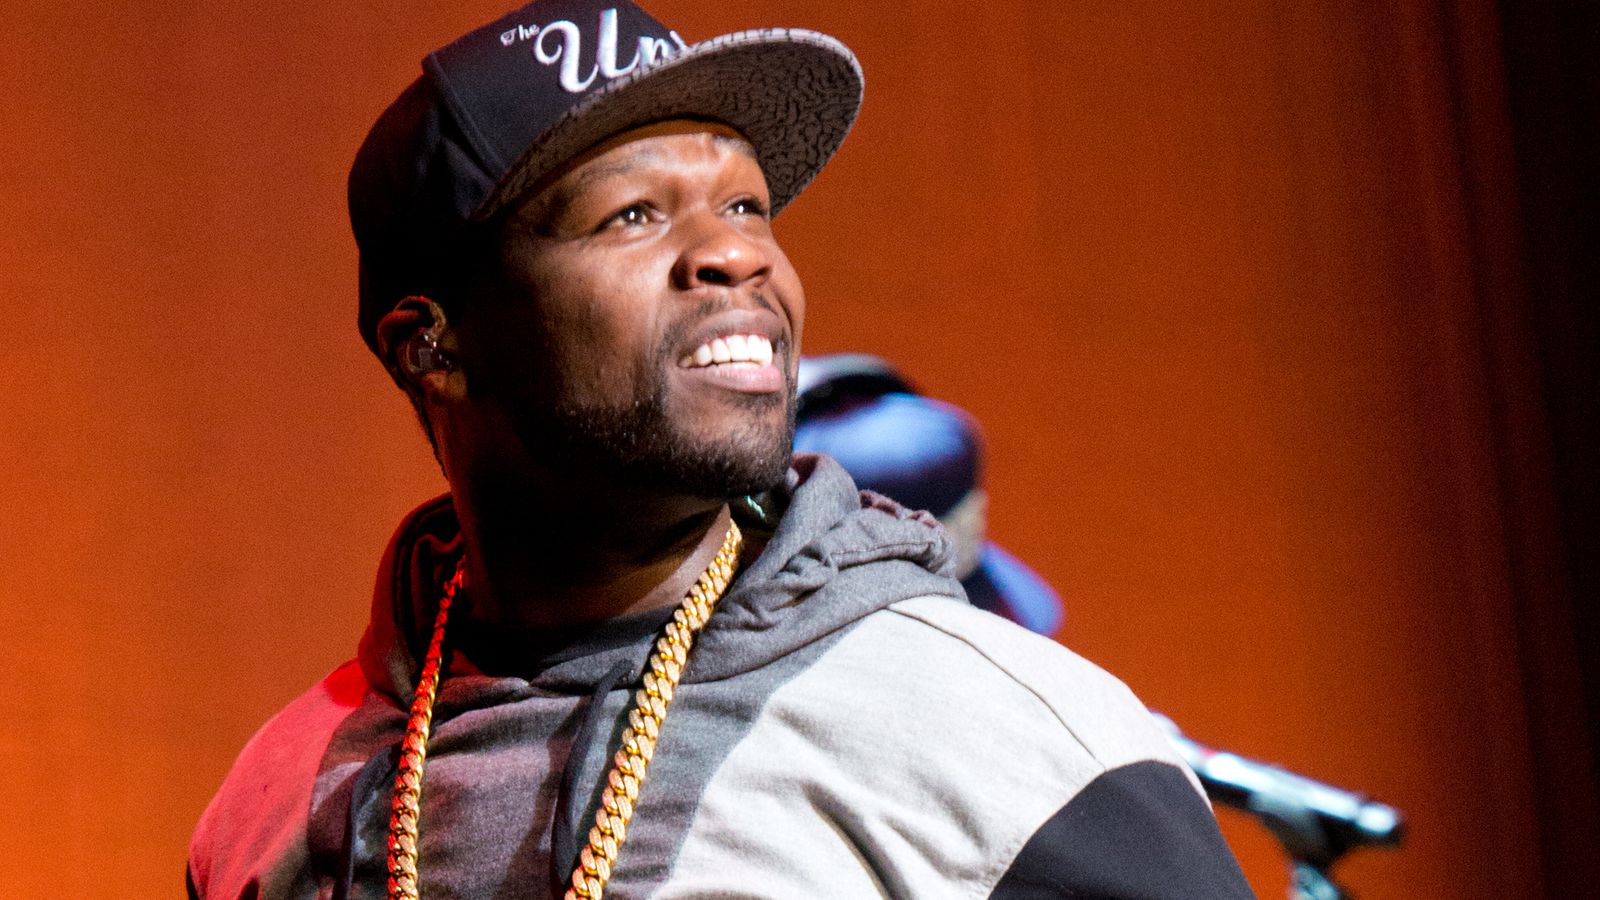 50 Cent Biography, Net Worth, Height, Career & More